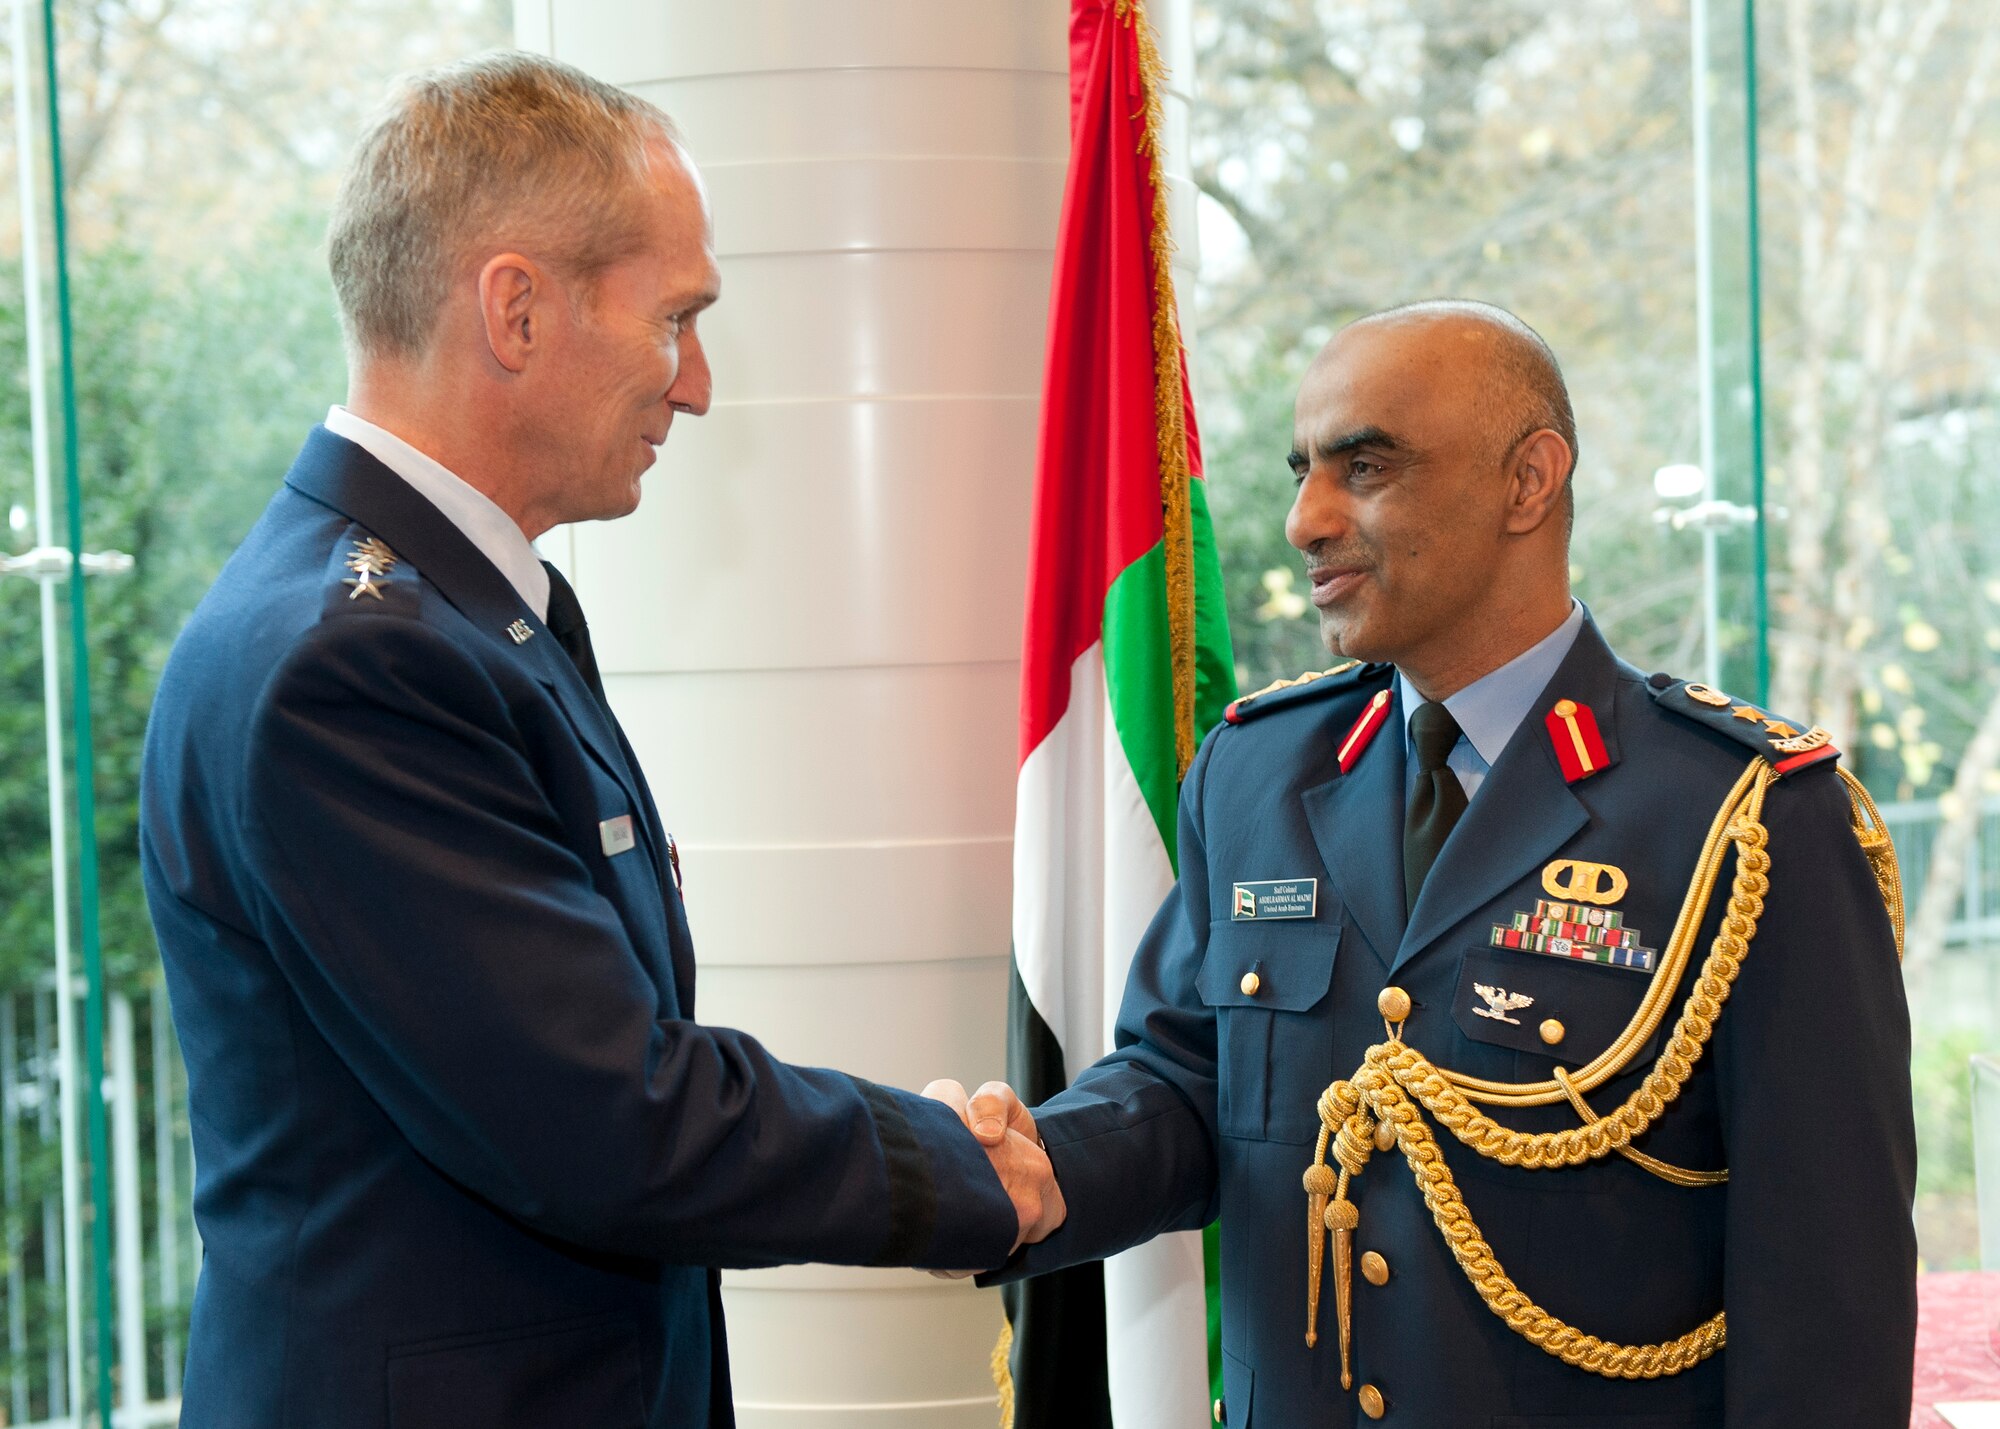 U.S. Air Force Gen. Mike Hostage III, is congratulated by the United Arab Emirates (UAE) Air Attaché Col. Abdelrahmn Al-Mazmiby after presenting the Foreign Operations Missions Medal to the general during a ceremony at the UAE Embassy, Washington D.C. on Nov. 15, 2011. (U.S. Air Force photo by Jim Varhegyi/Released)